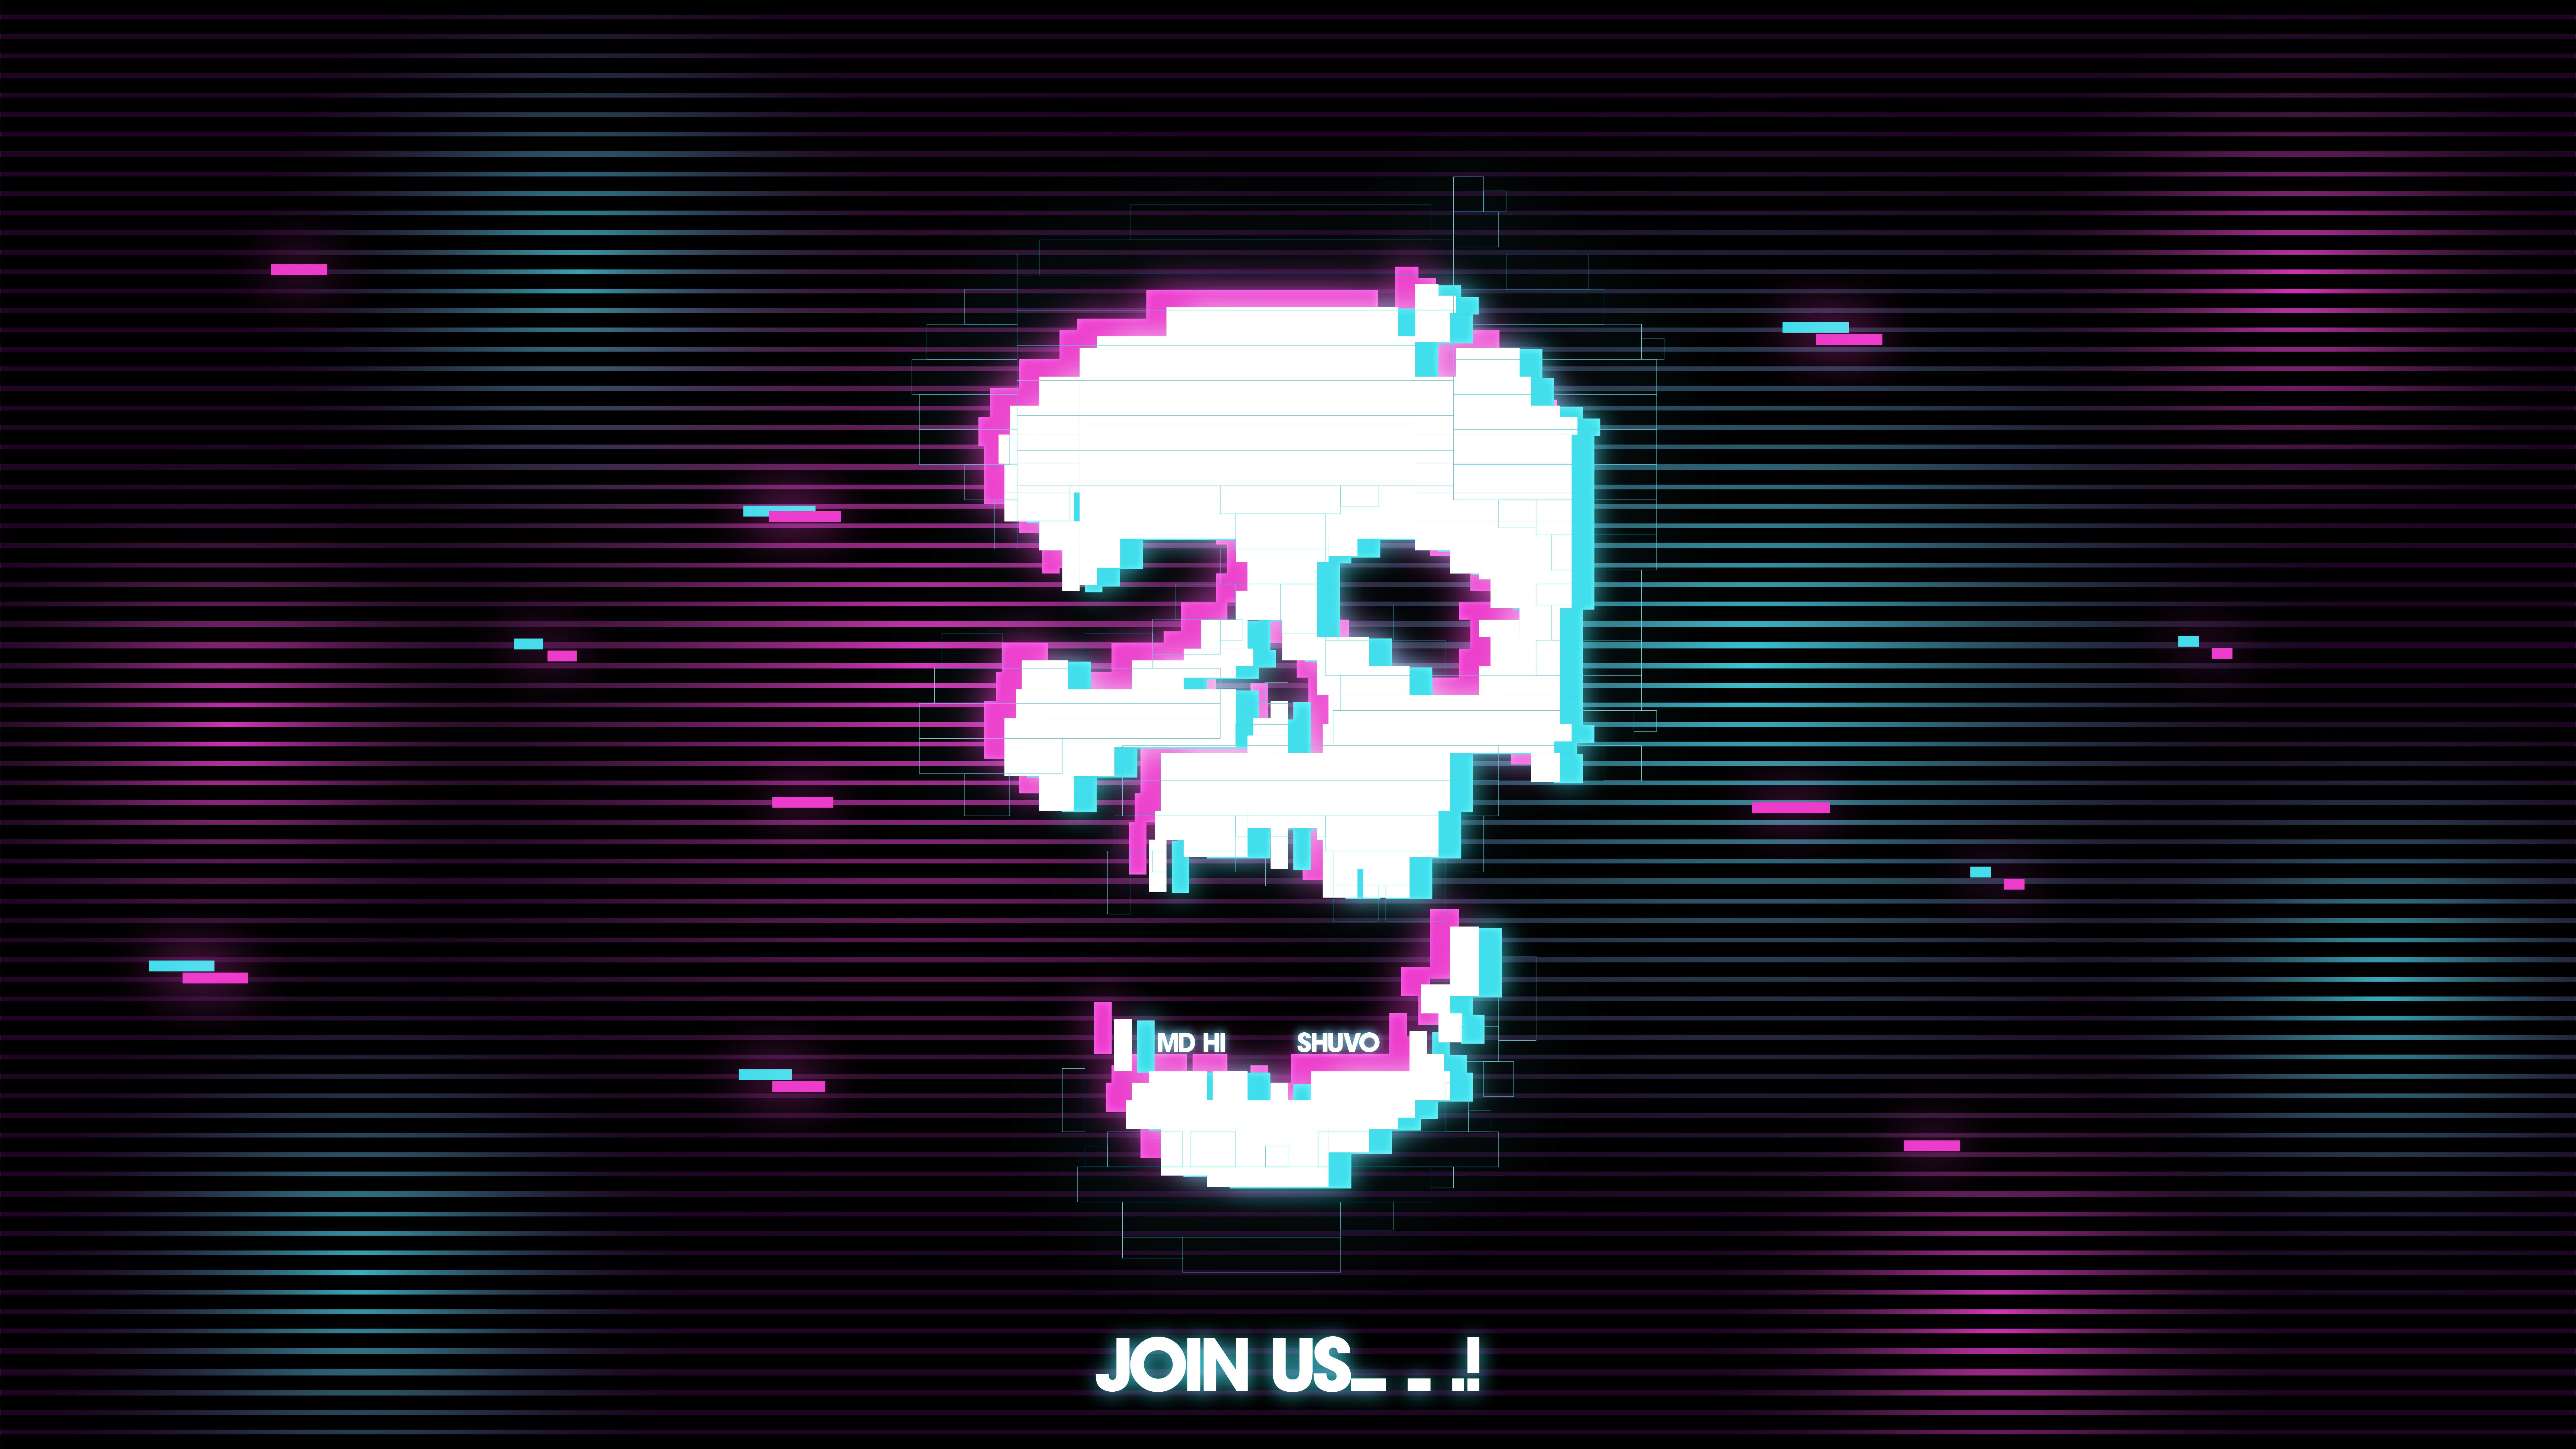 Check Out My Project: JOIN US! Skeleton Glitch Effect Wallpaper Gallery 78074177 JOI. Glitch Effect, Skull Wallpaper, Wallpaper